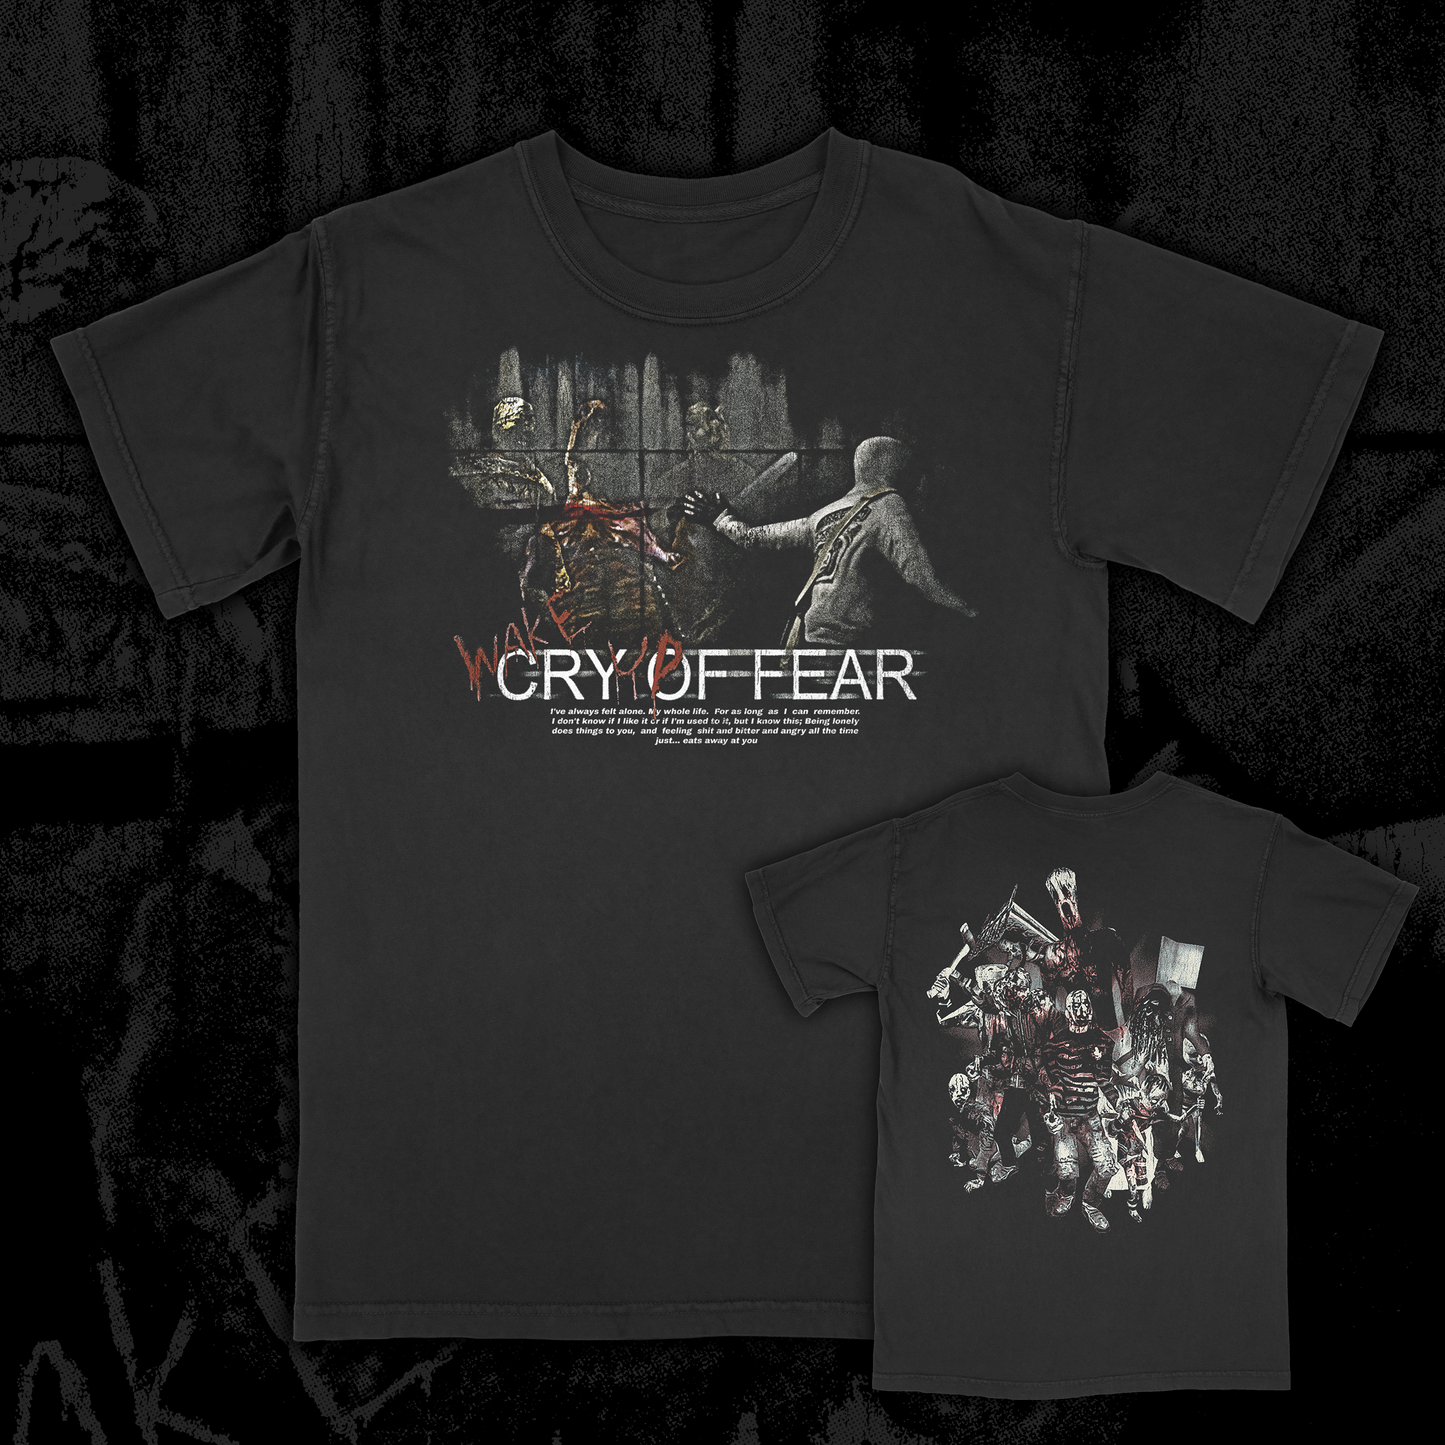 Cry of Fear - Loneliness (2 options)